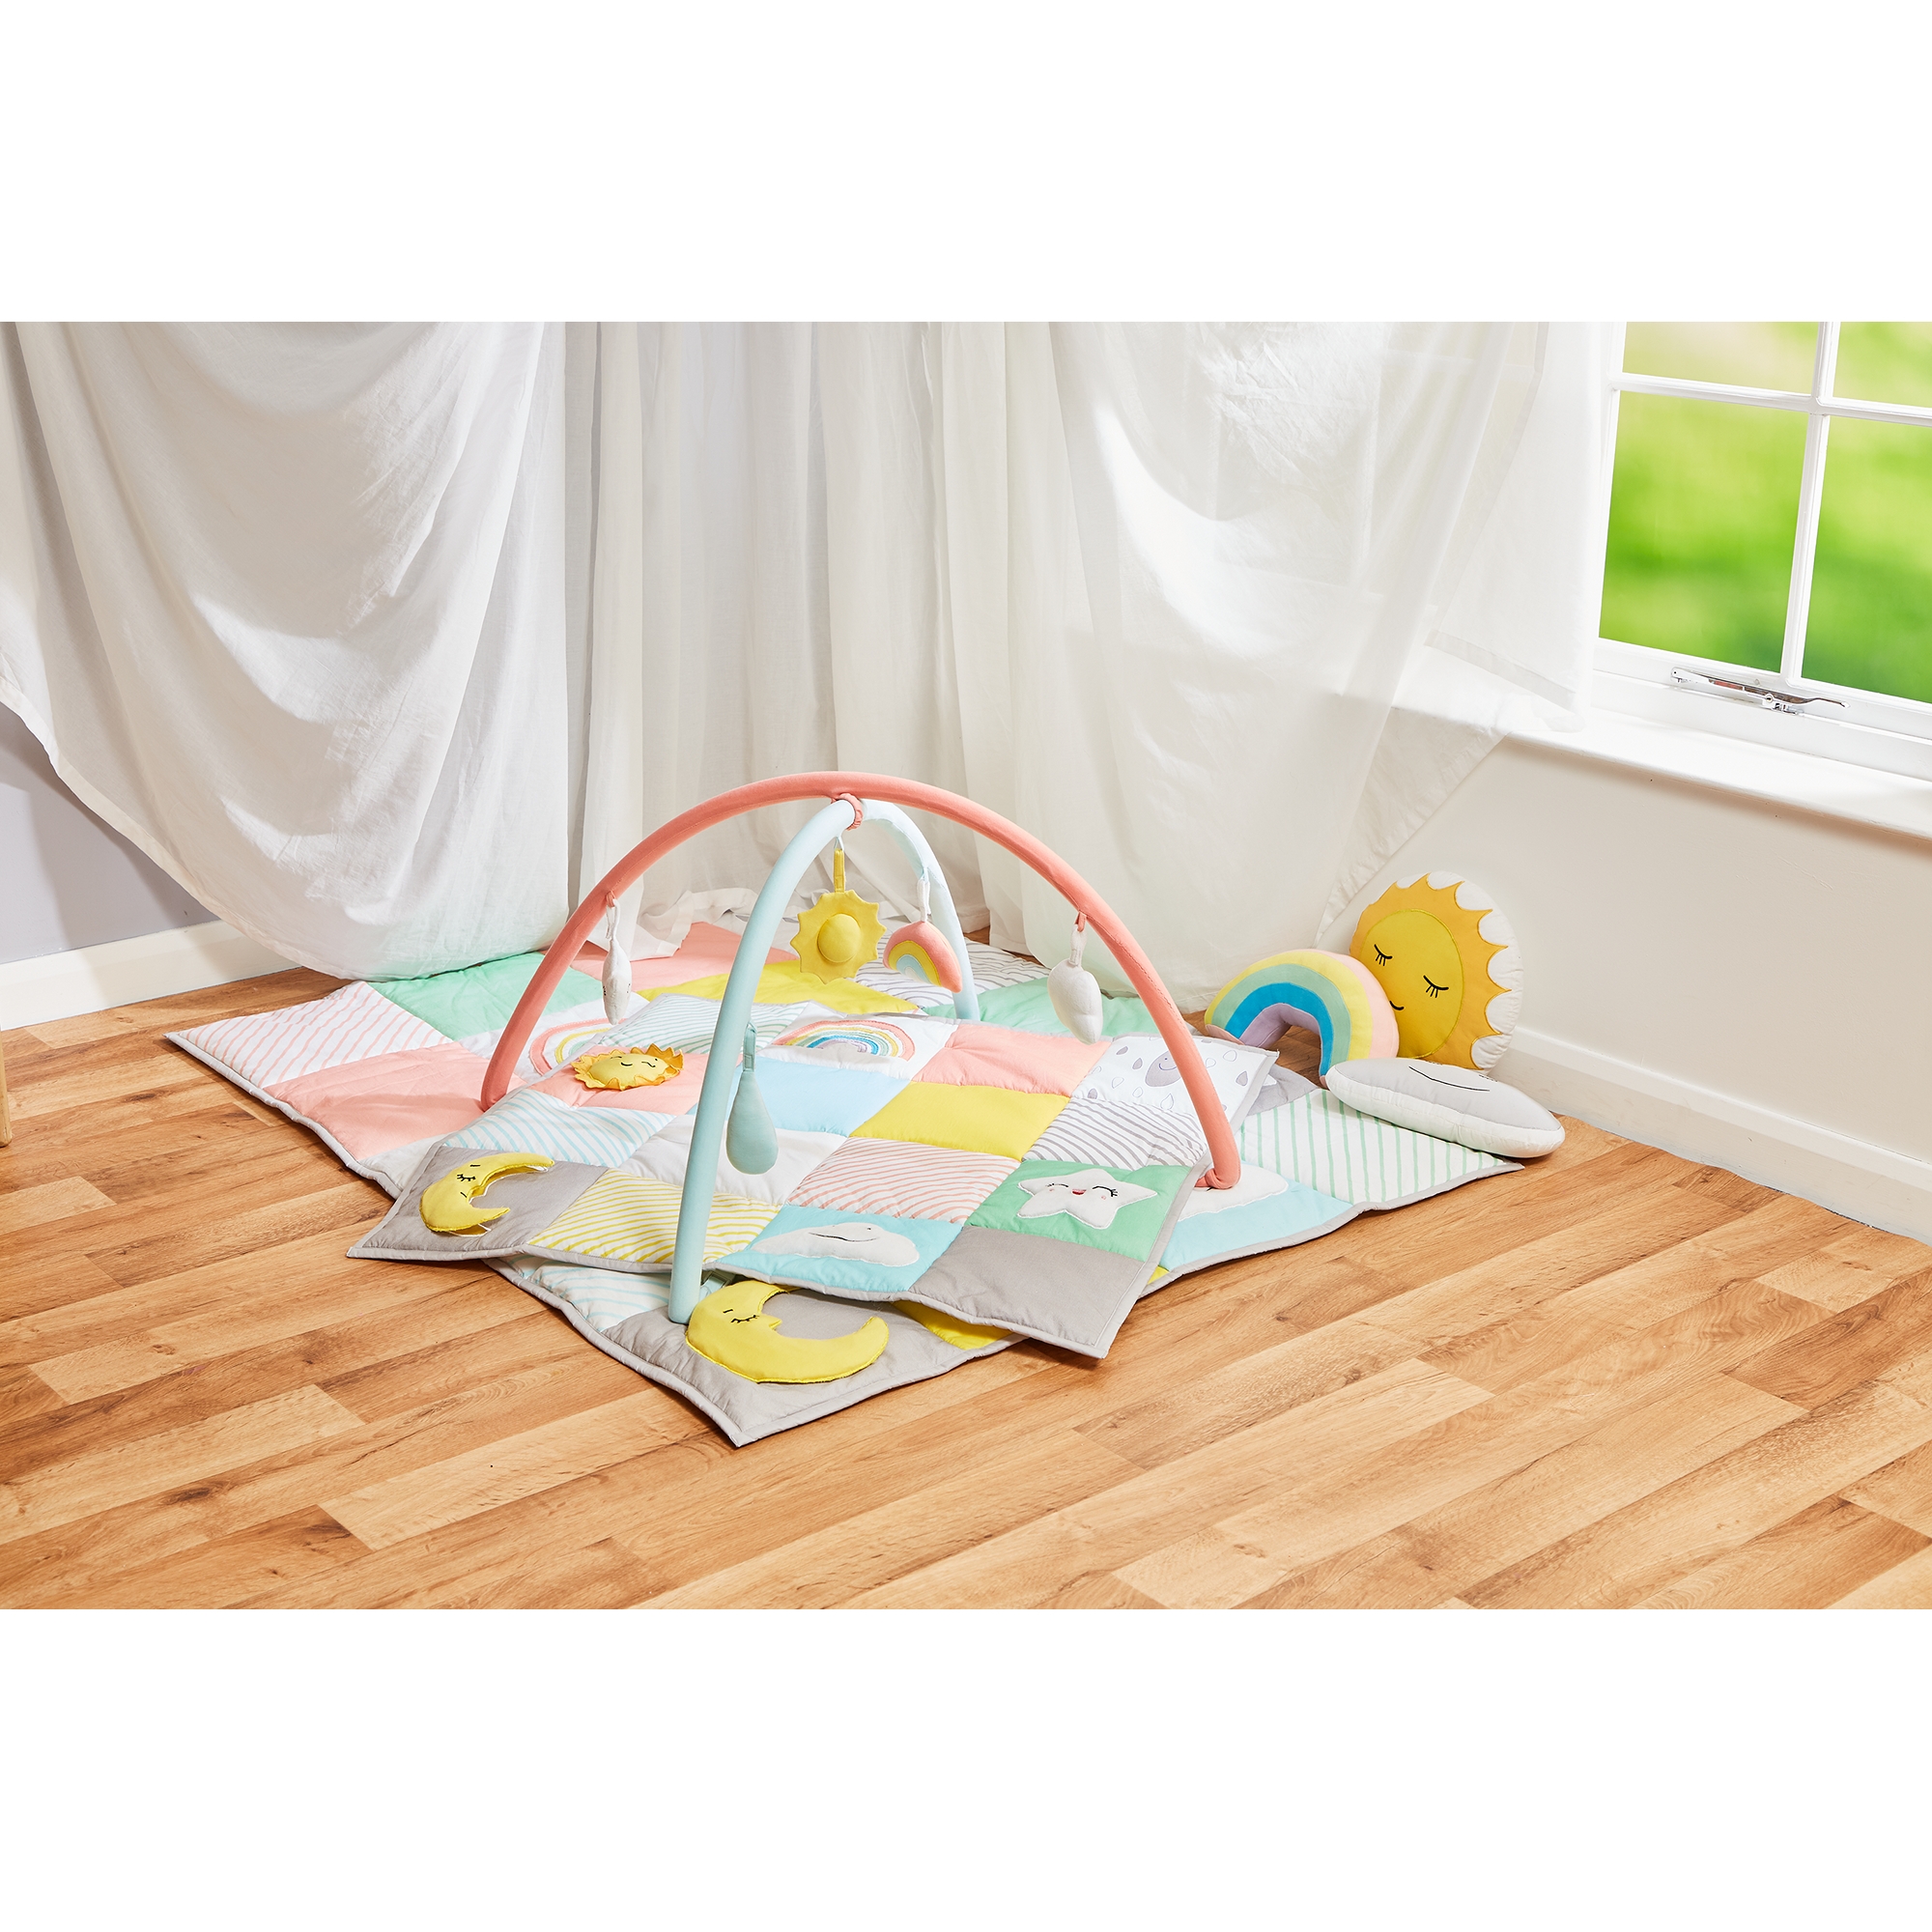 Rainbow Baby Gym from Hope Education